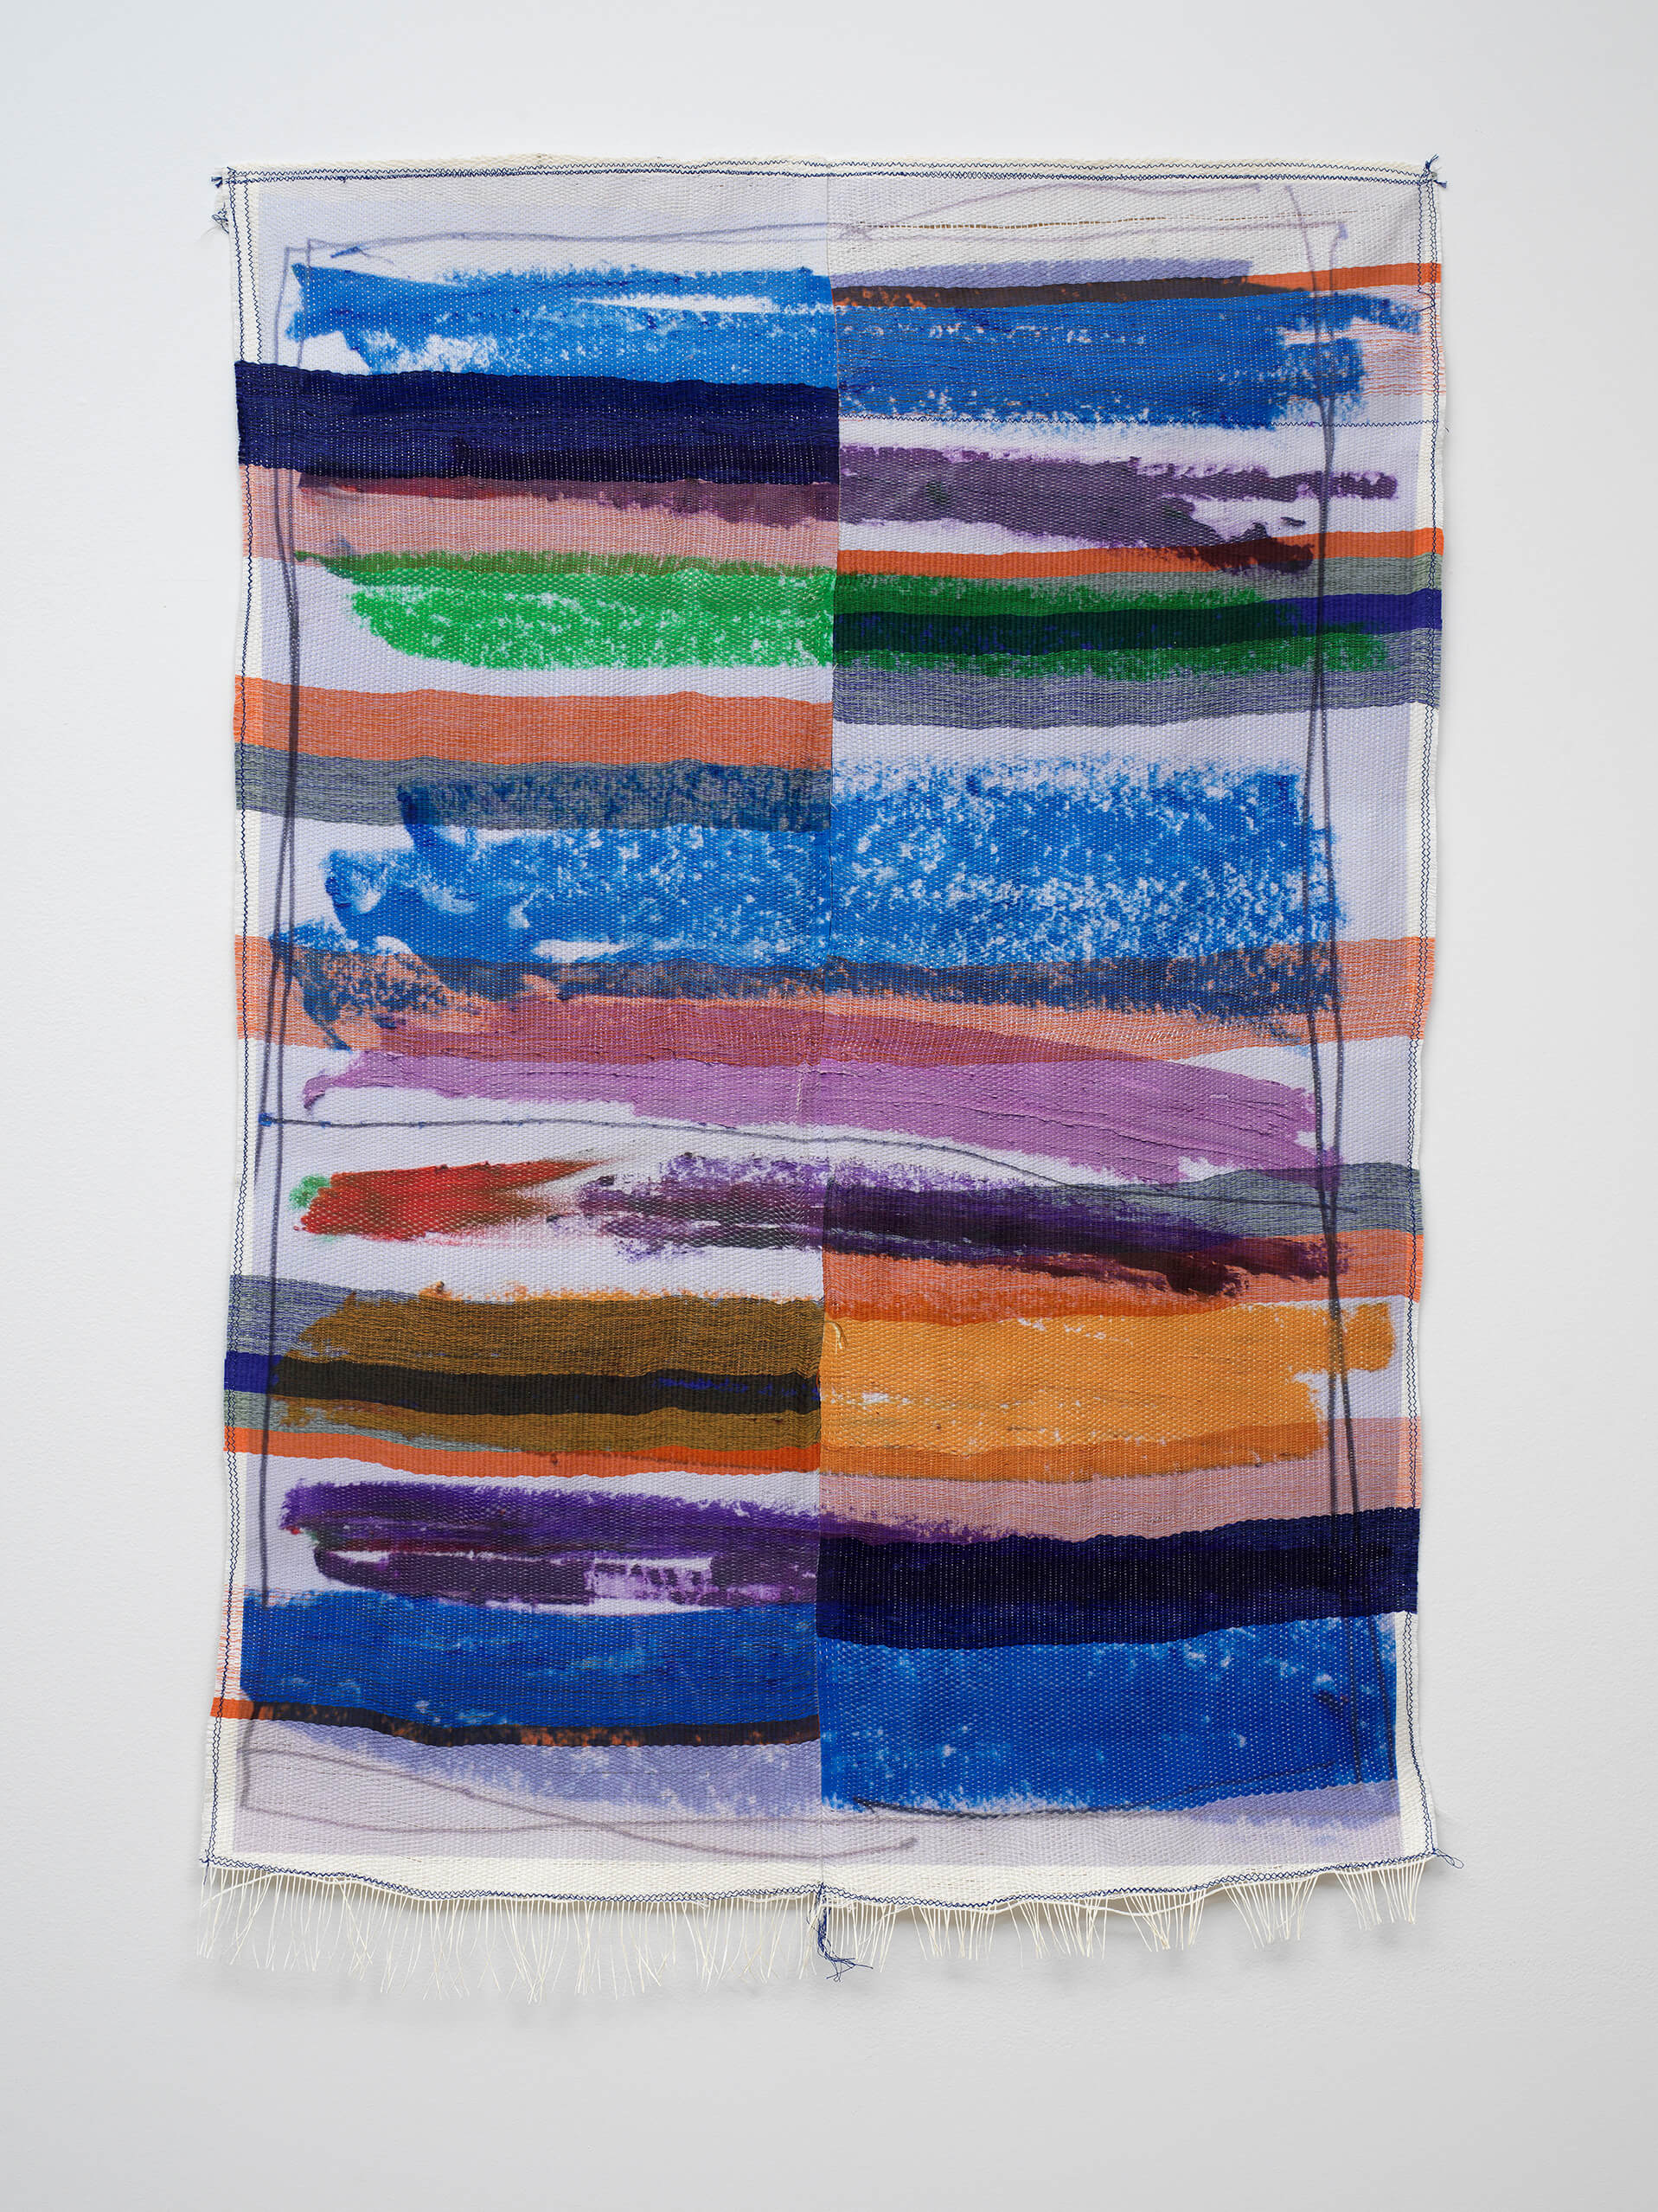 Marie Hazard in between lines, 2021 hand woven in paper and polyester threads and digital print 49 1/4 x 33 1/2 in. (125 x 85 cm.)